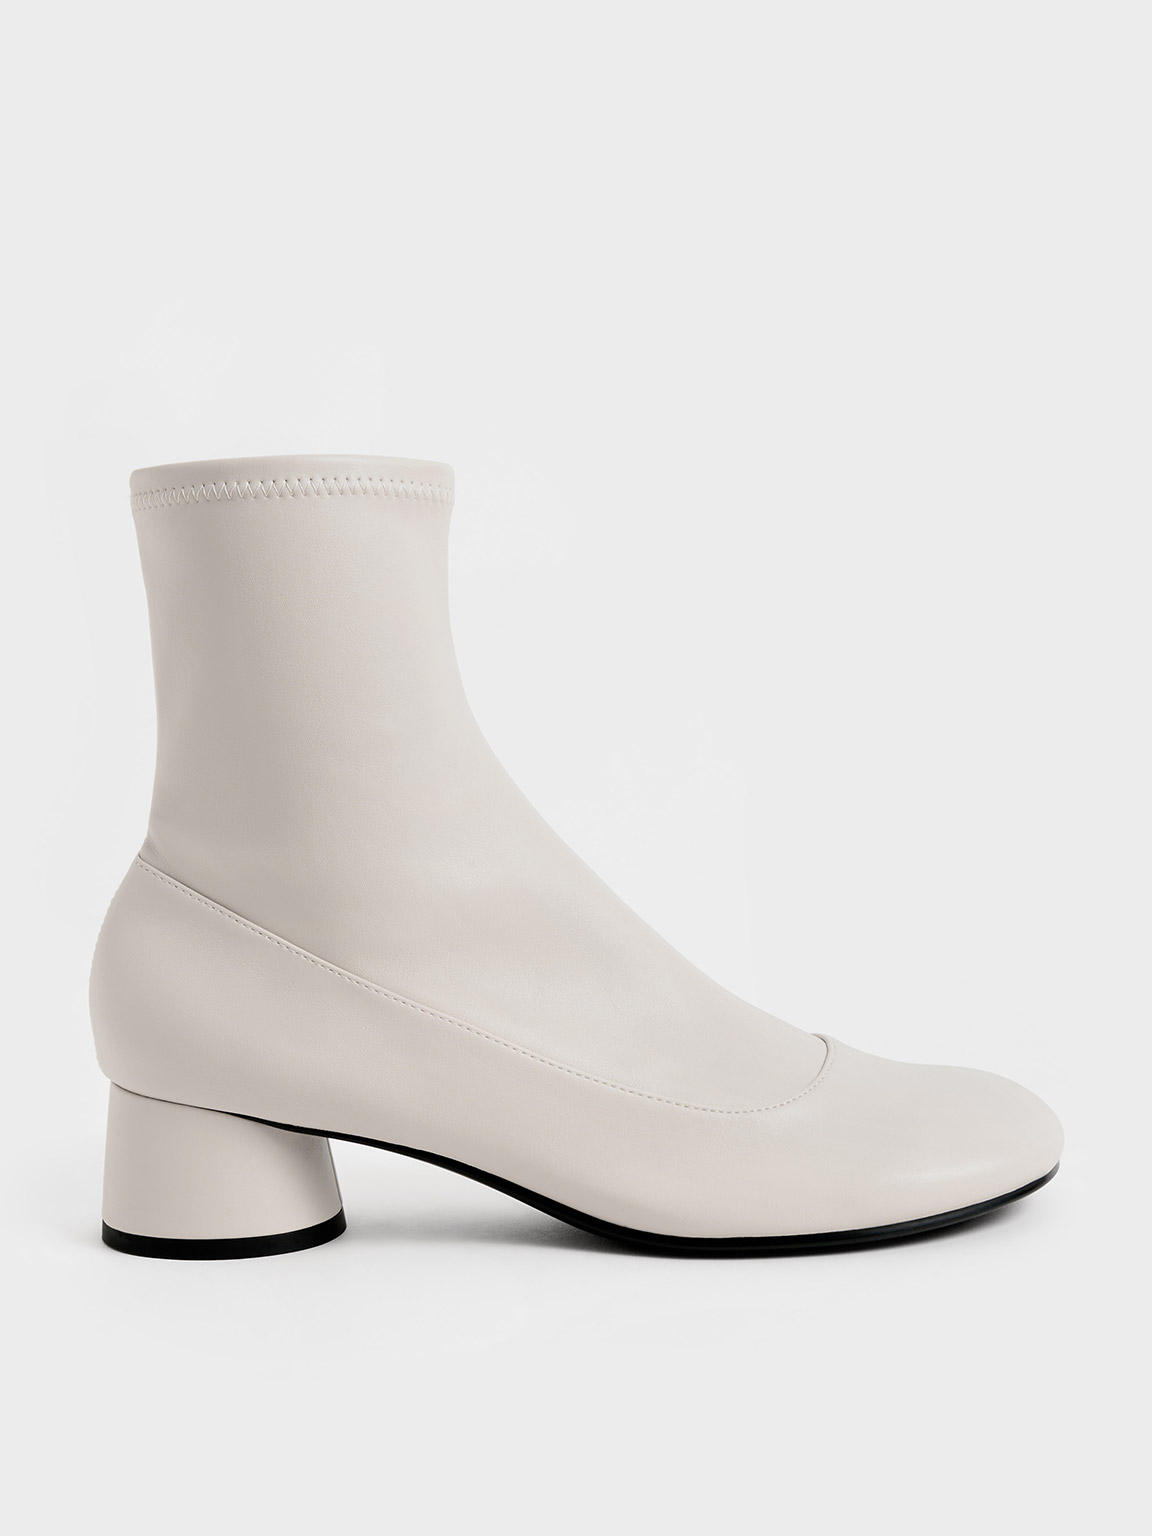 Stitch-Trim Cylindrical Heel Ankle Boots